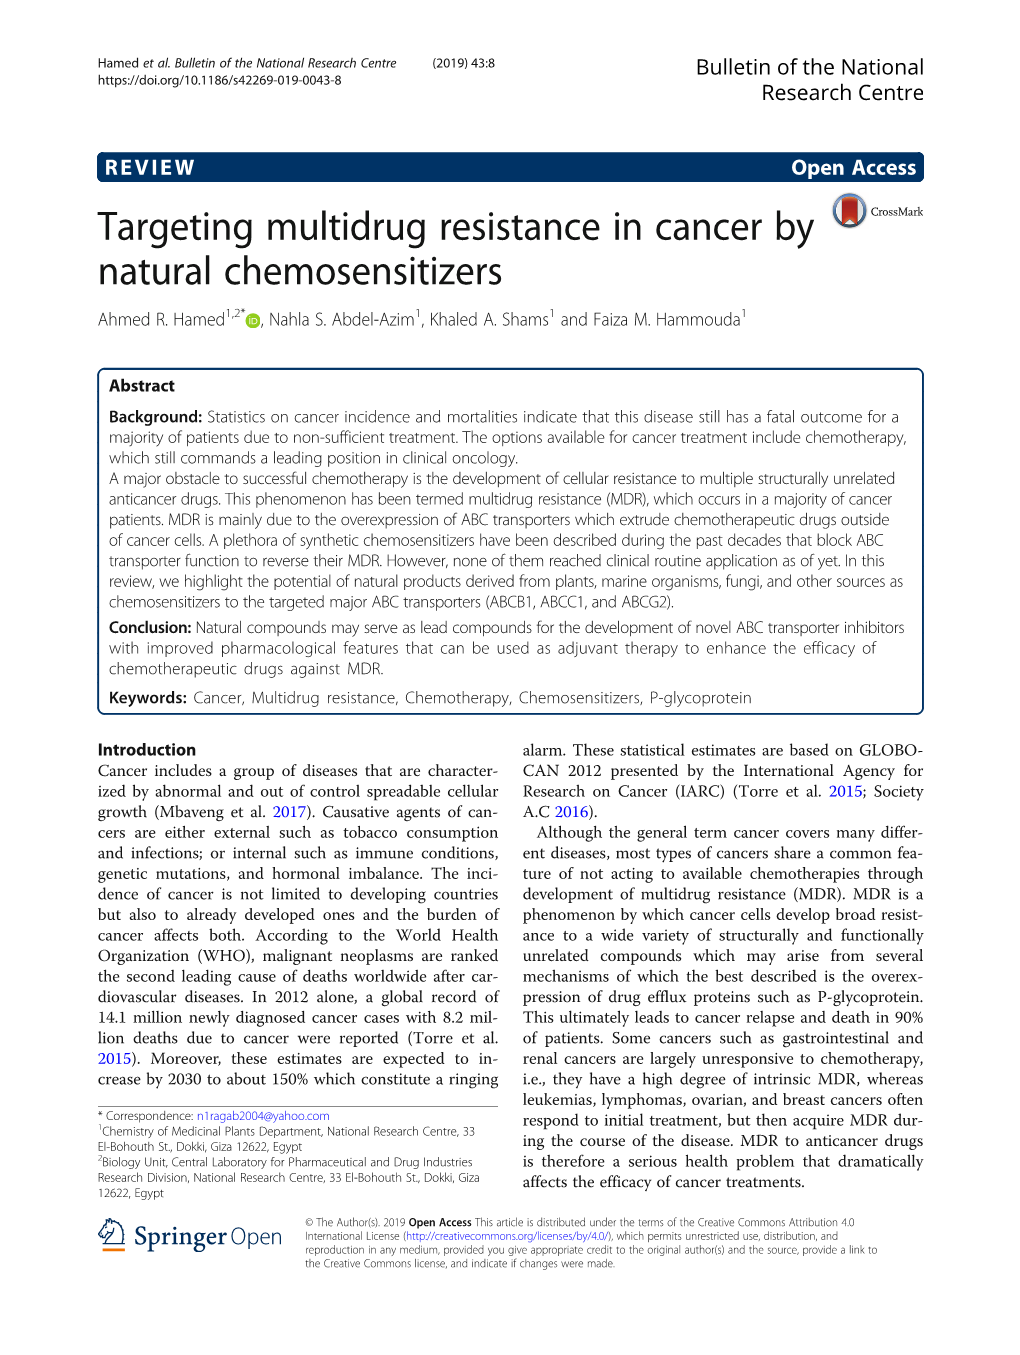 Targeting Multidrug Resistance in Cancer by Natural Chemosensitizers Ahmed R